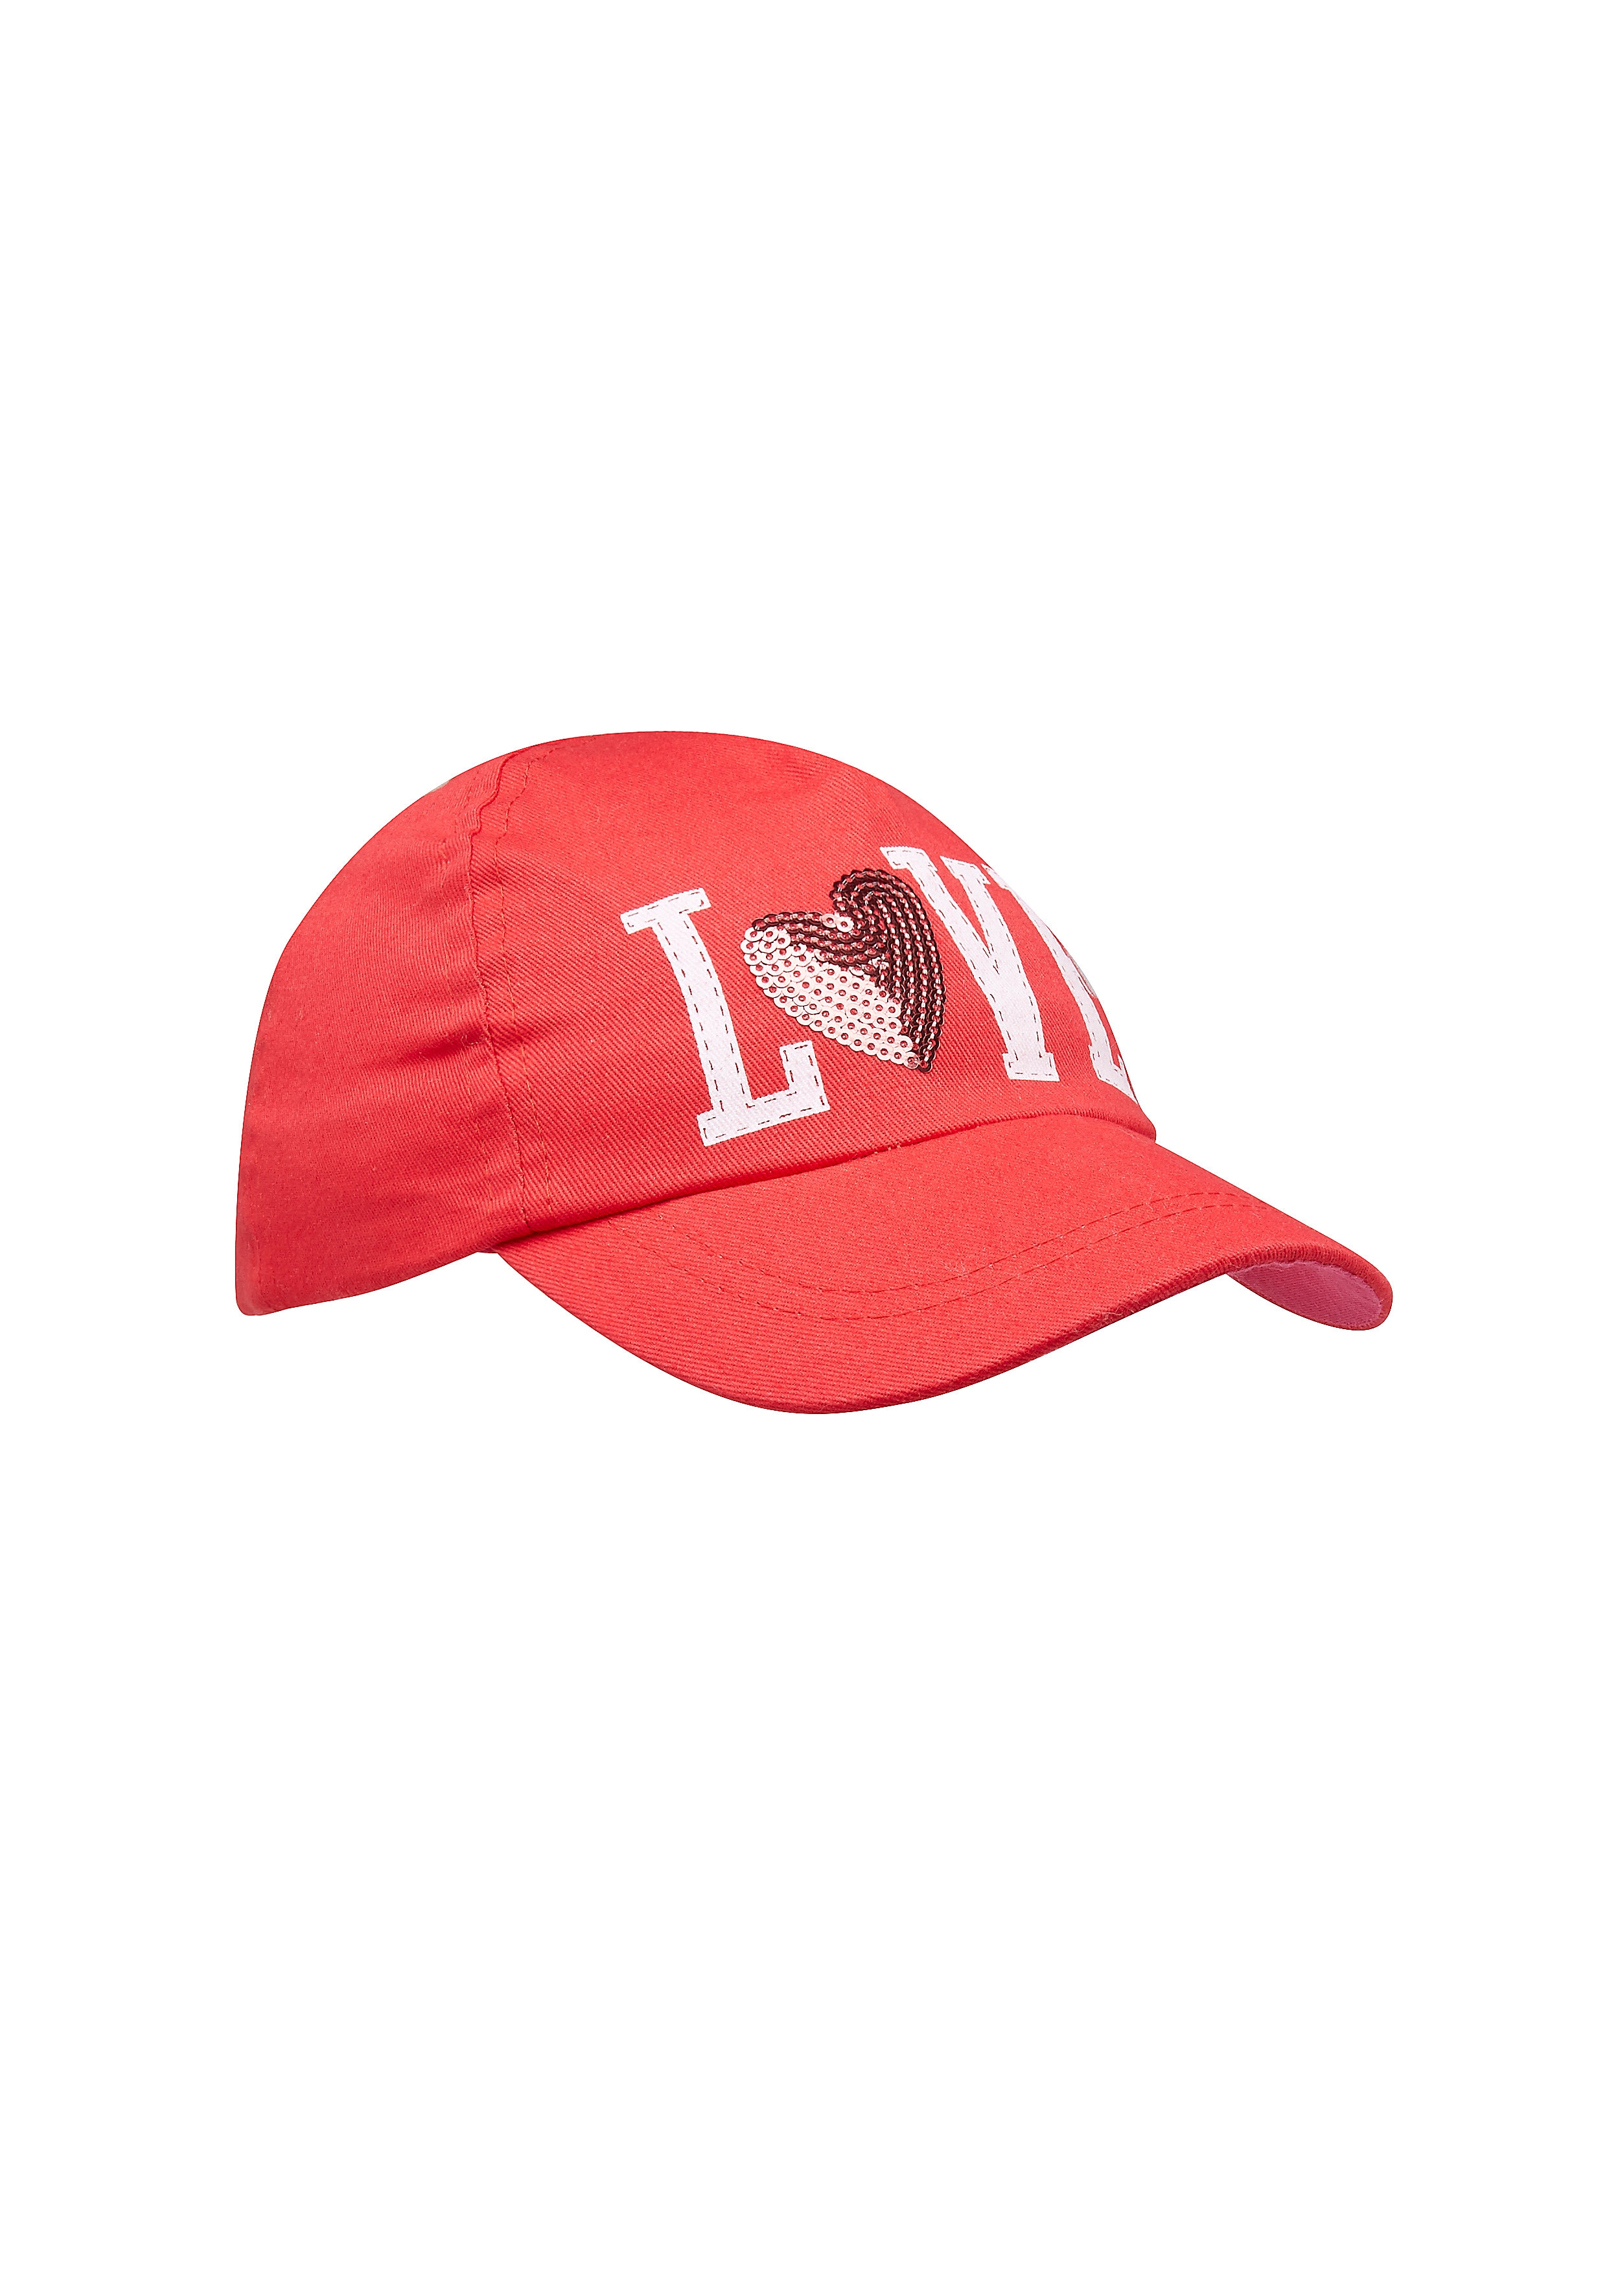 Mothercare | Girls Cap Sequined Design - Red